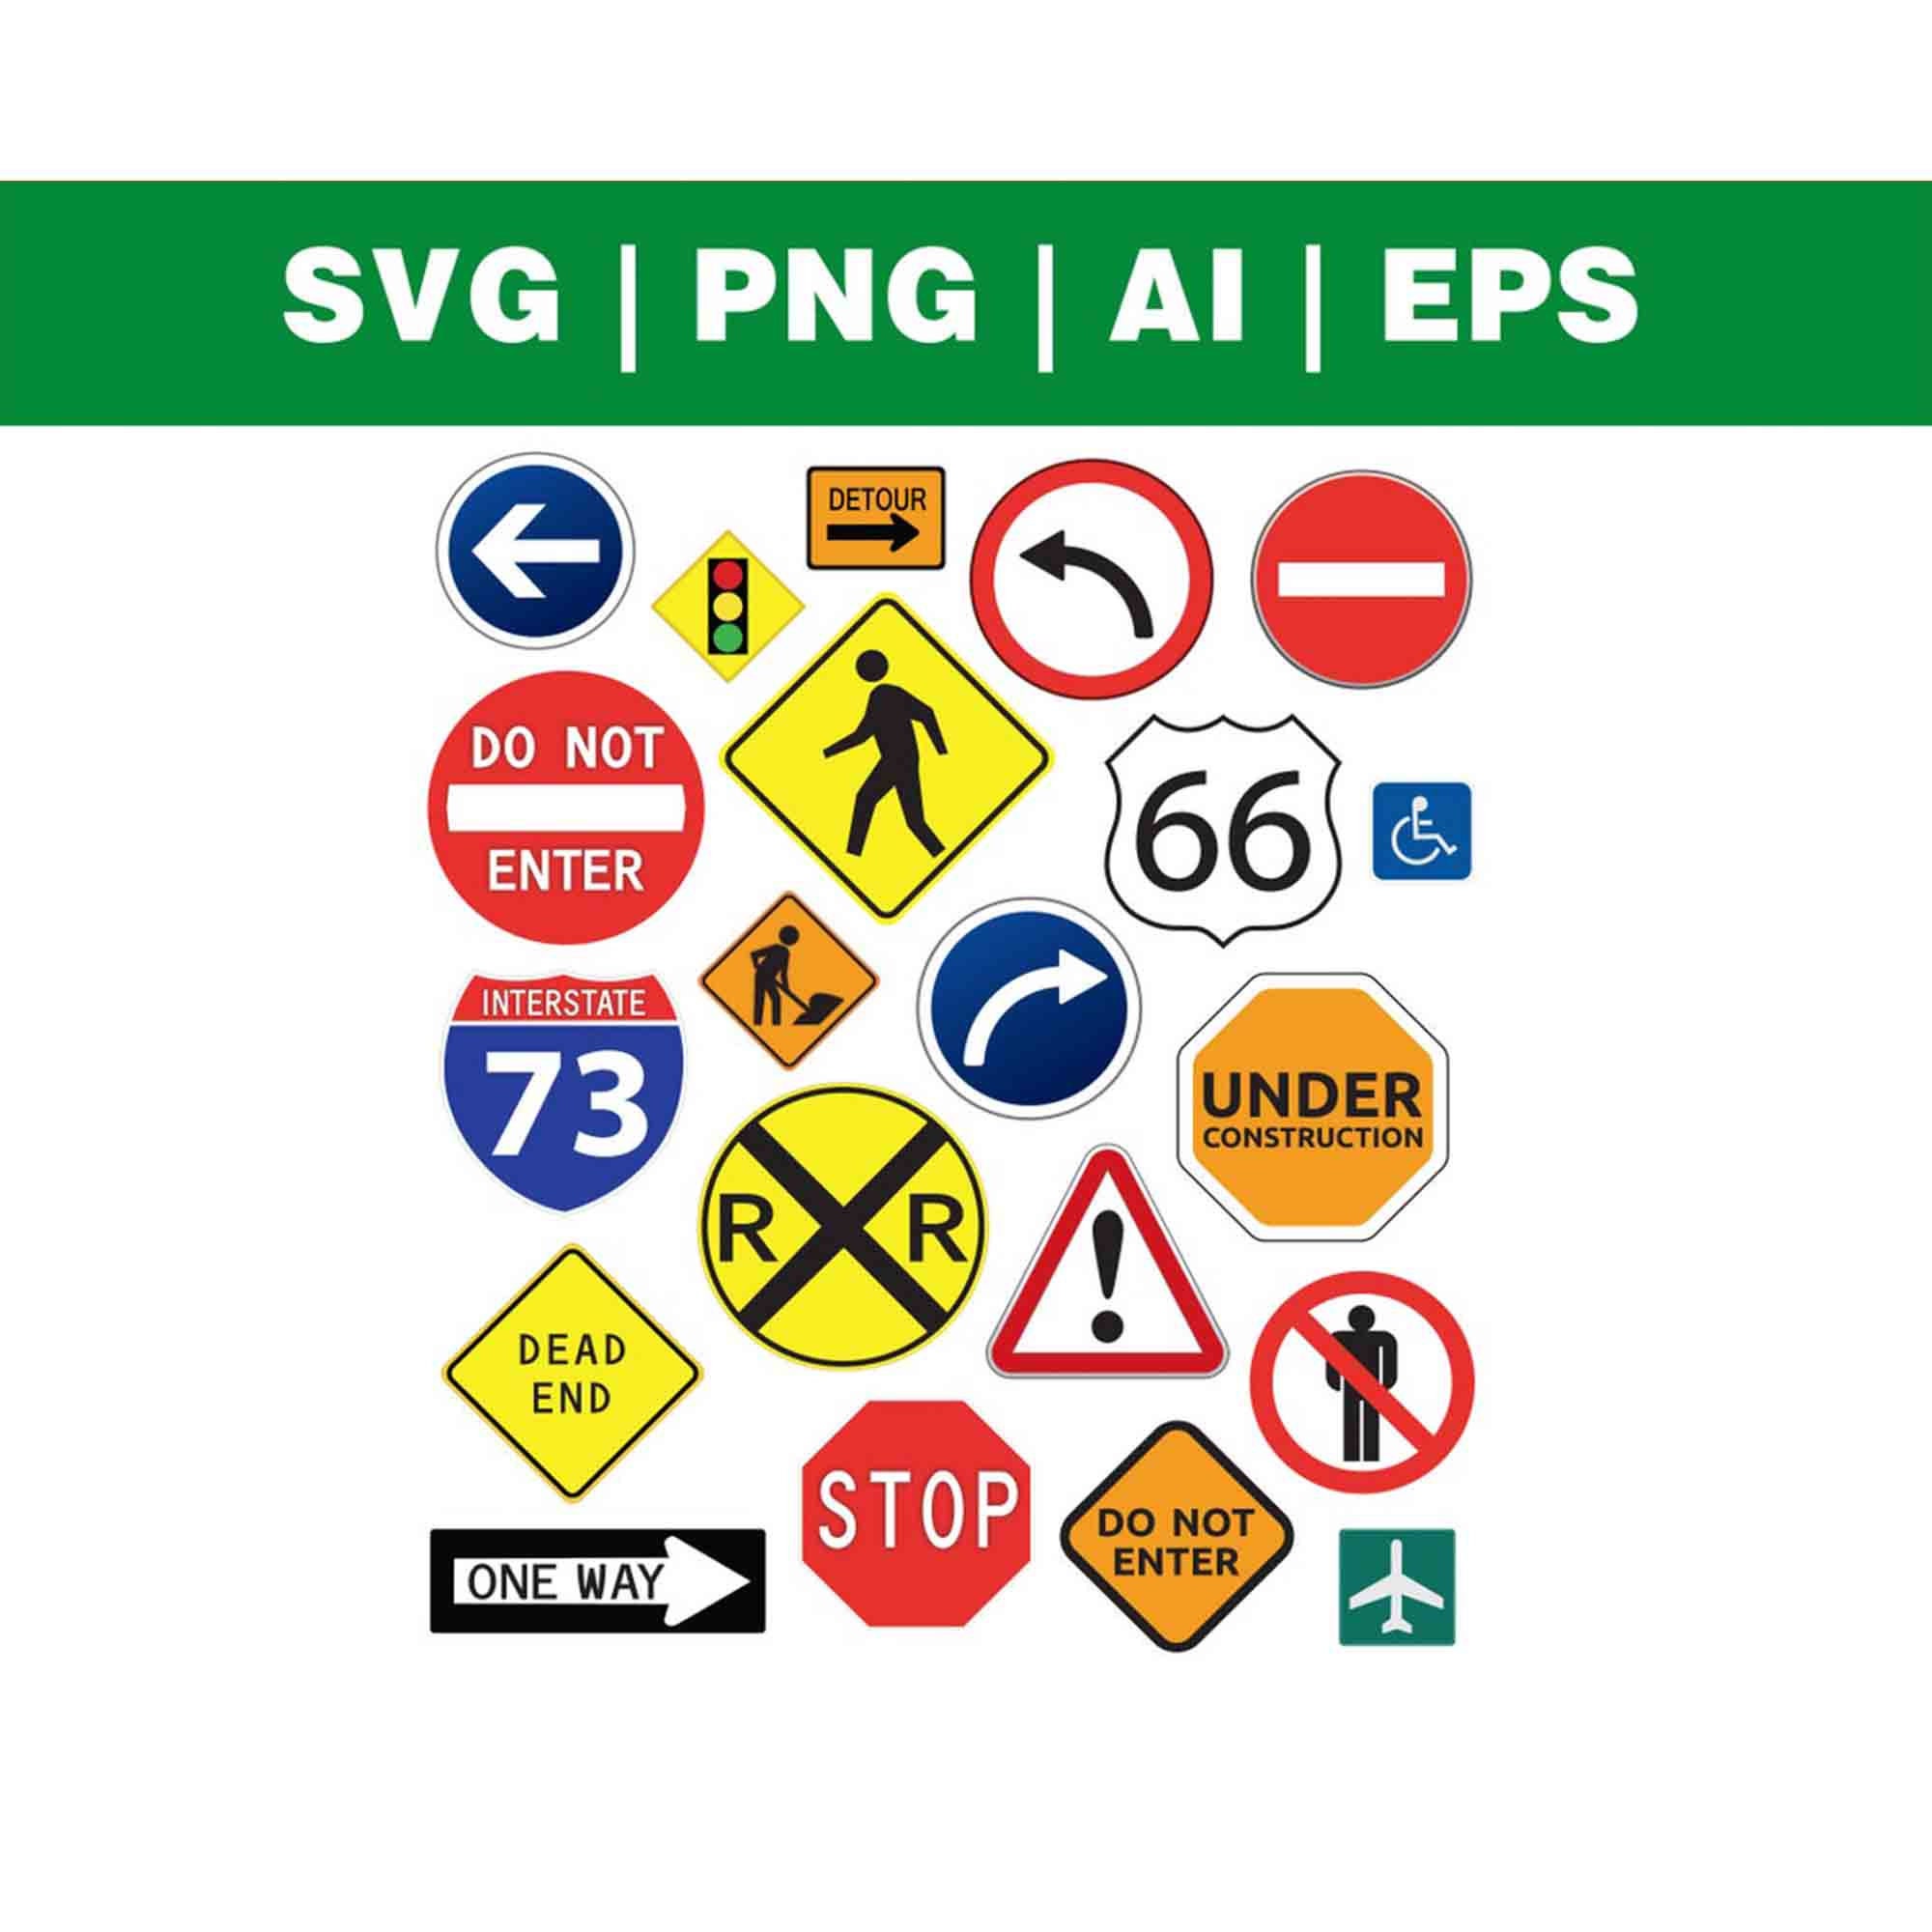 Stop and Go Signs. Road Stop Sign. Road Go Sign. SVG Icons. Stock Vector